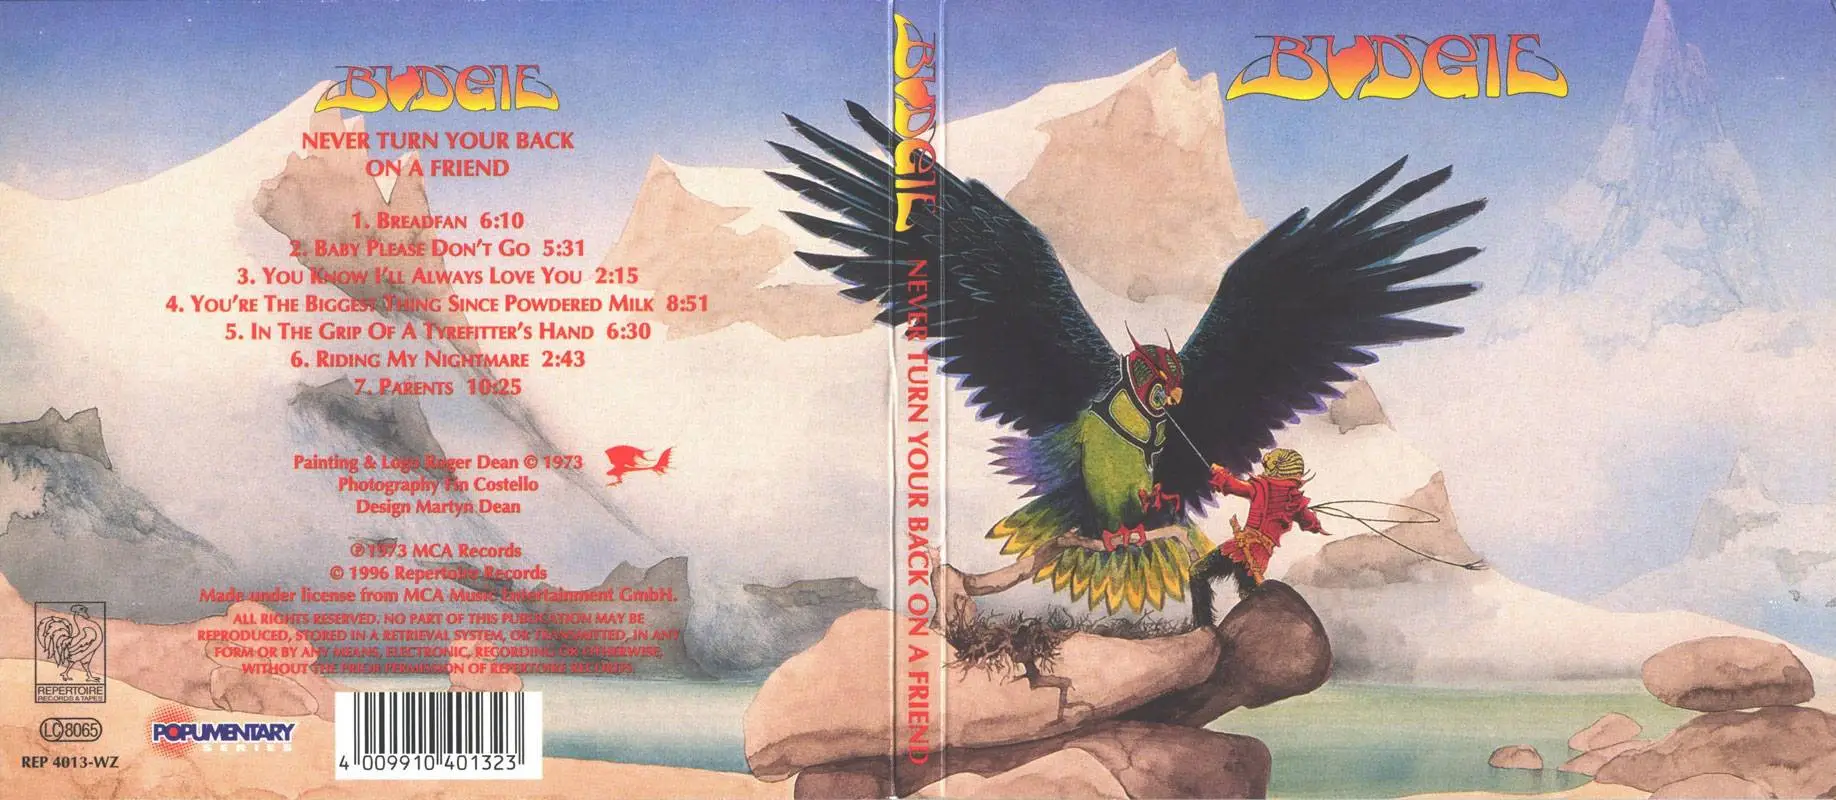 Back flac. Never turn your back on a friend - 1973. Never turn your back on a friend Budgie. Budgie Rock Band. Budgie 1975.